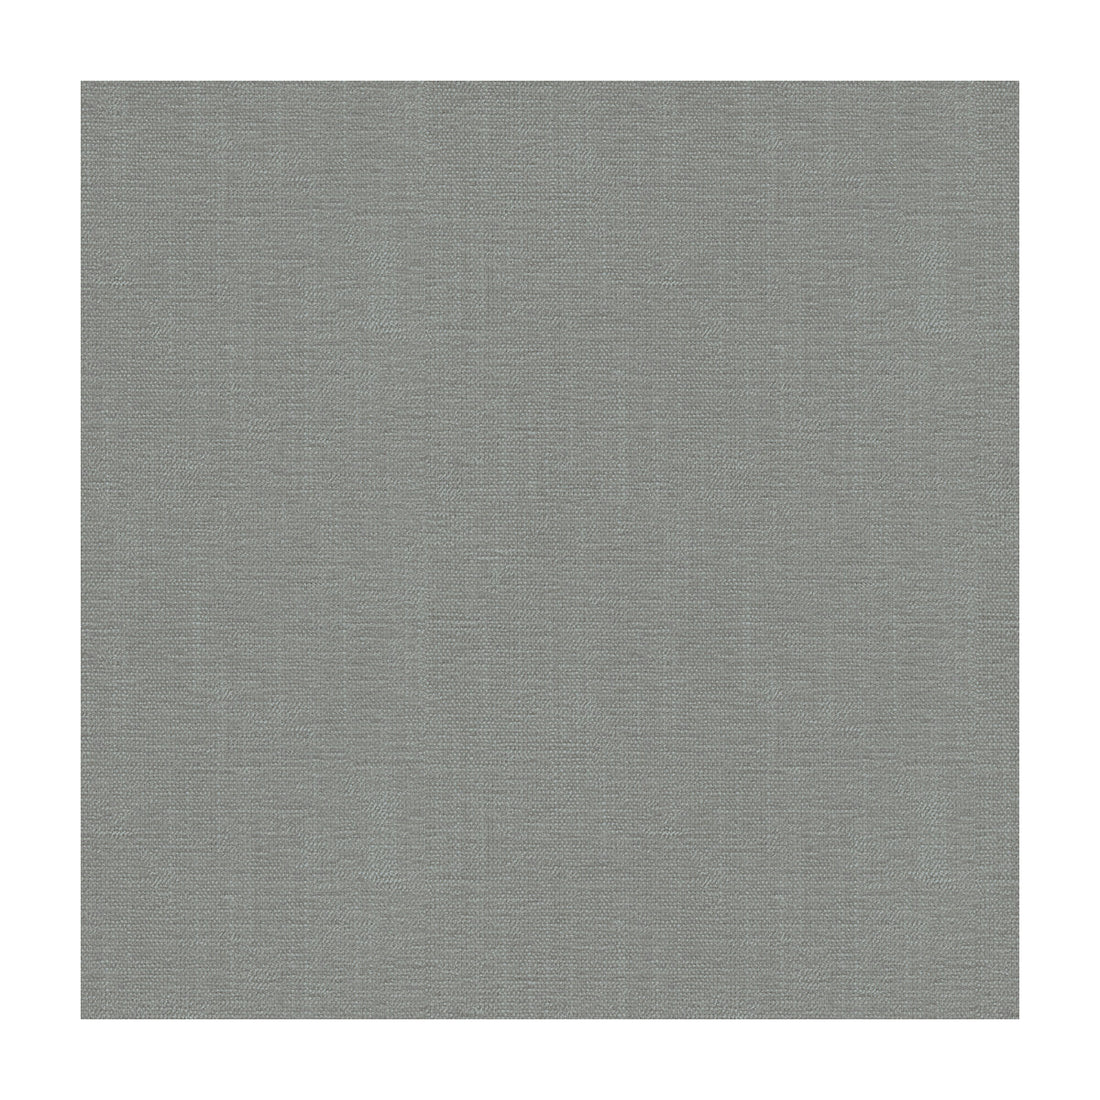 Kravet Smart fabric in 33831-52 color - pattern 33831.52.0 - by Kravet Smart in the Performance Crypton Home collection